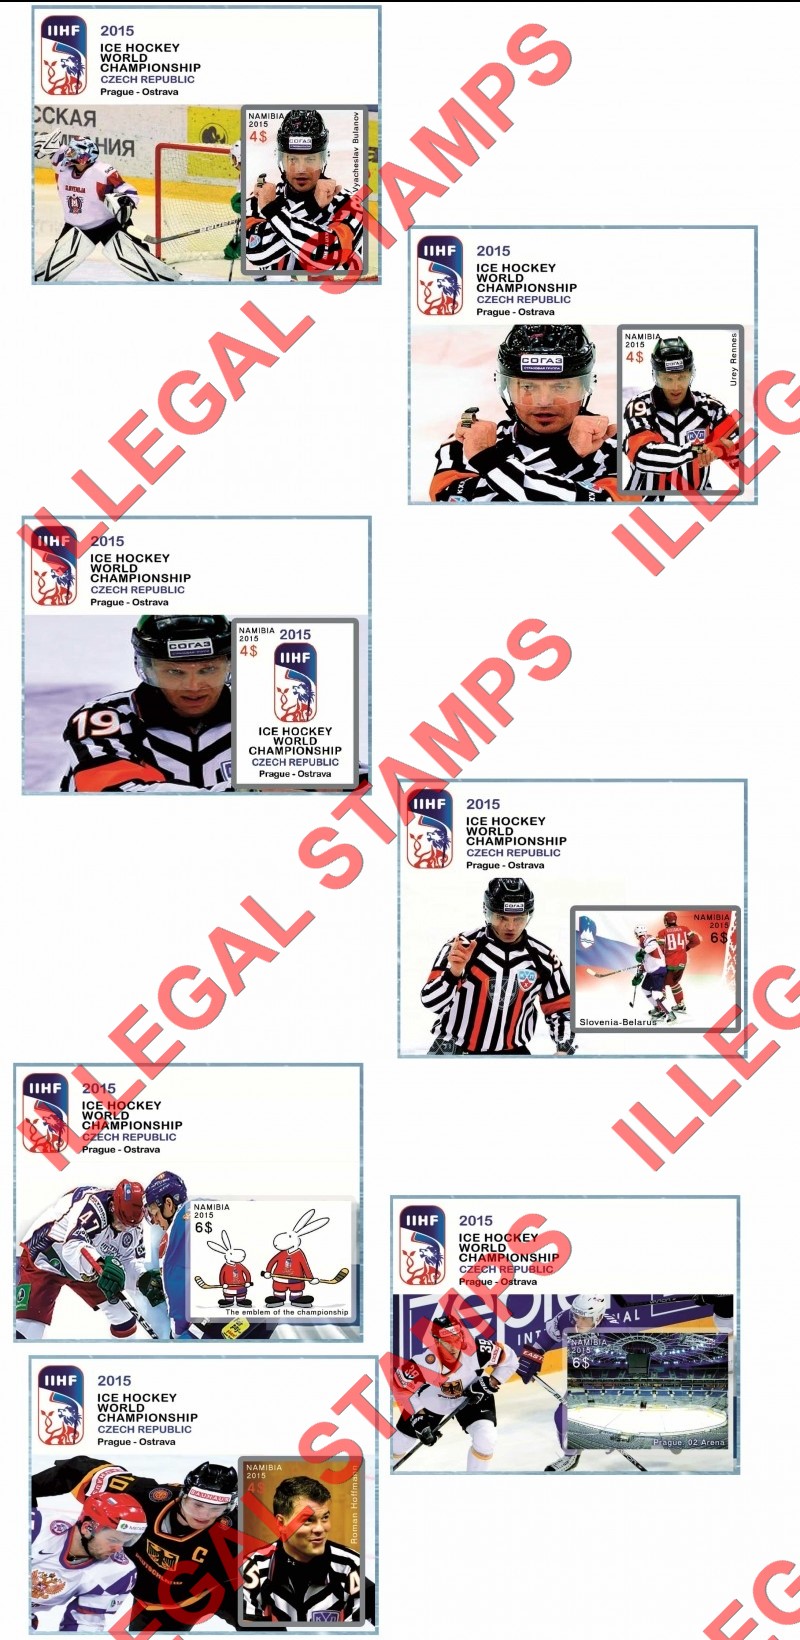 Namibia 2015 Ice Hockey World Championship Illegal Stamp Souvenir Sheets of 1 (Part 2)